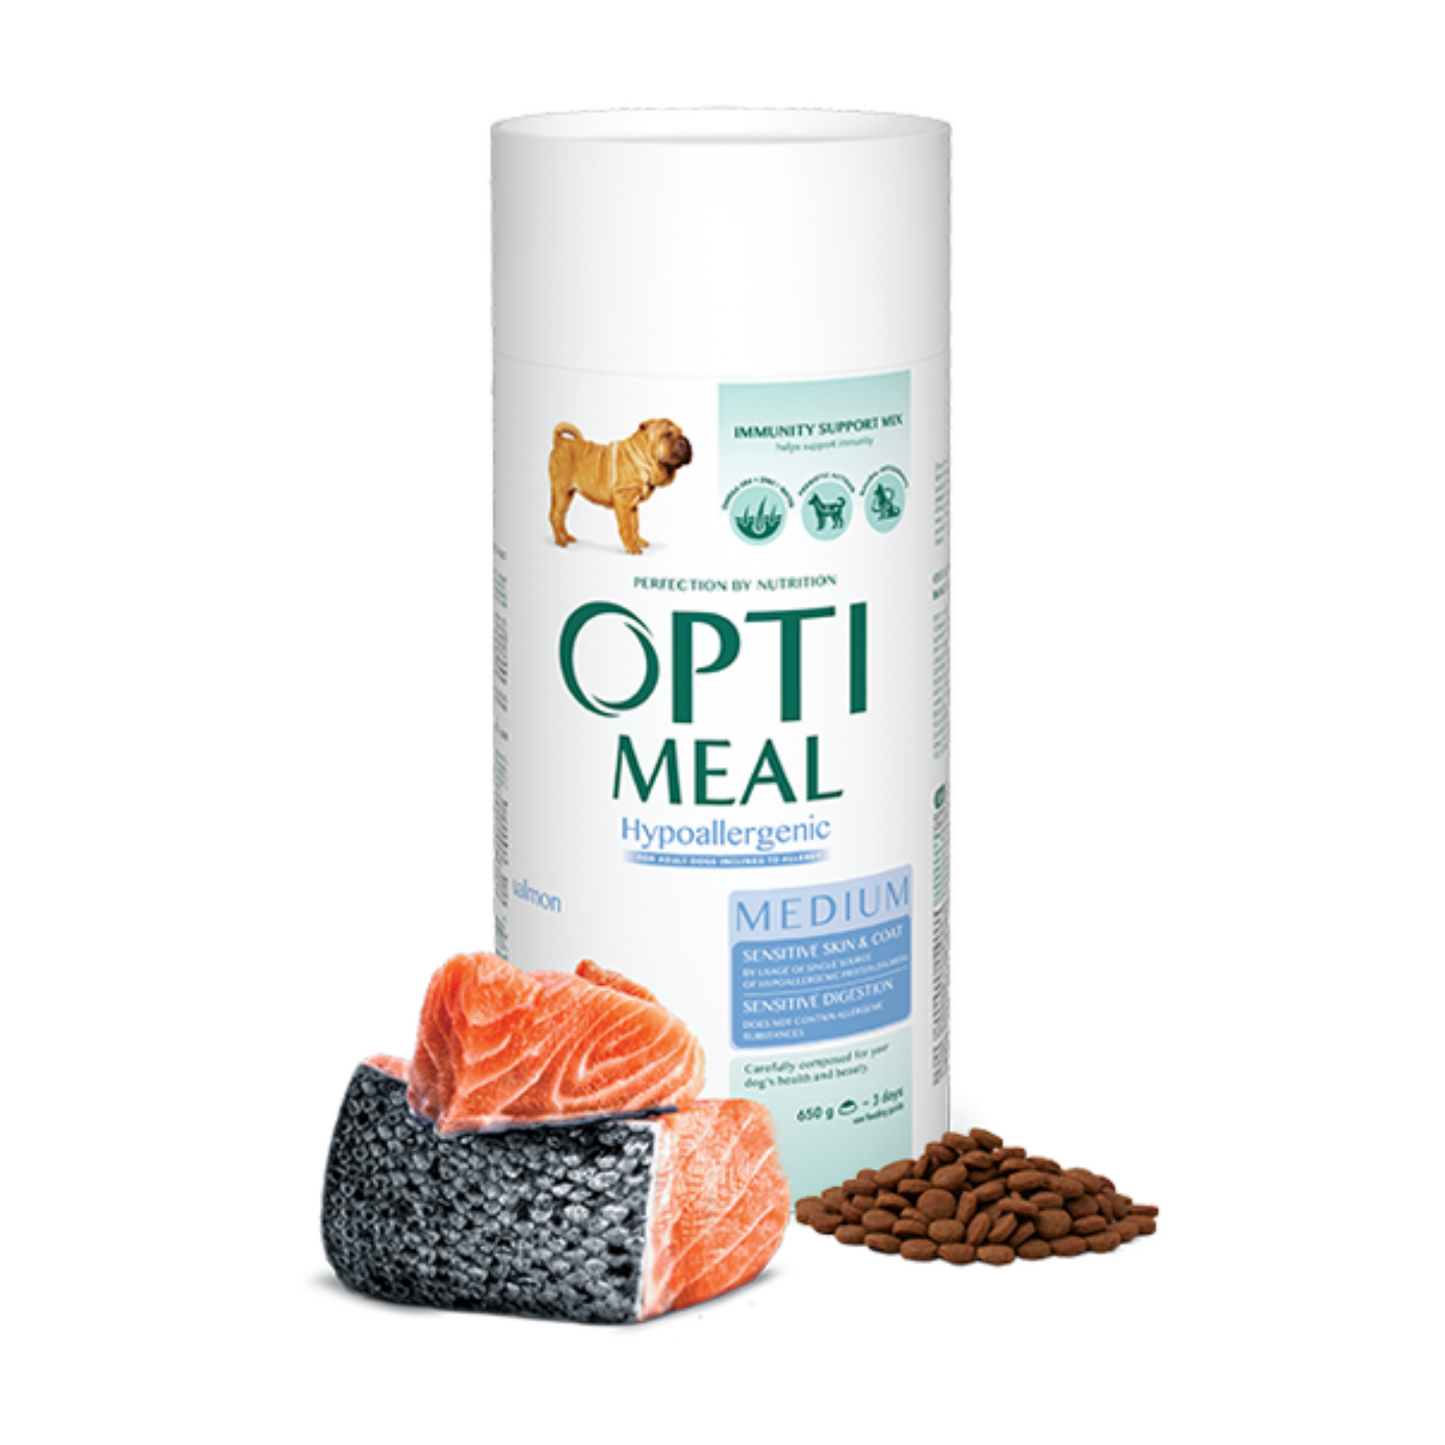 OPTIMEAL Hypoallergenic dry dog food for adult dogs of medium breeds with Salmon